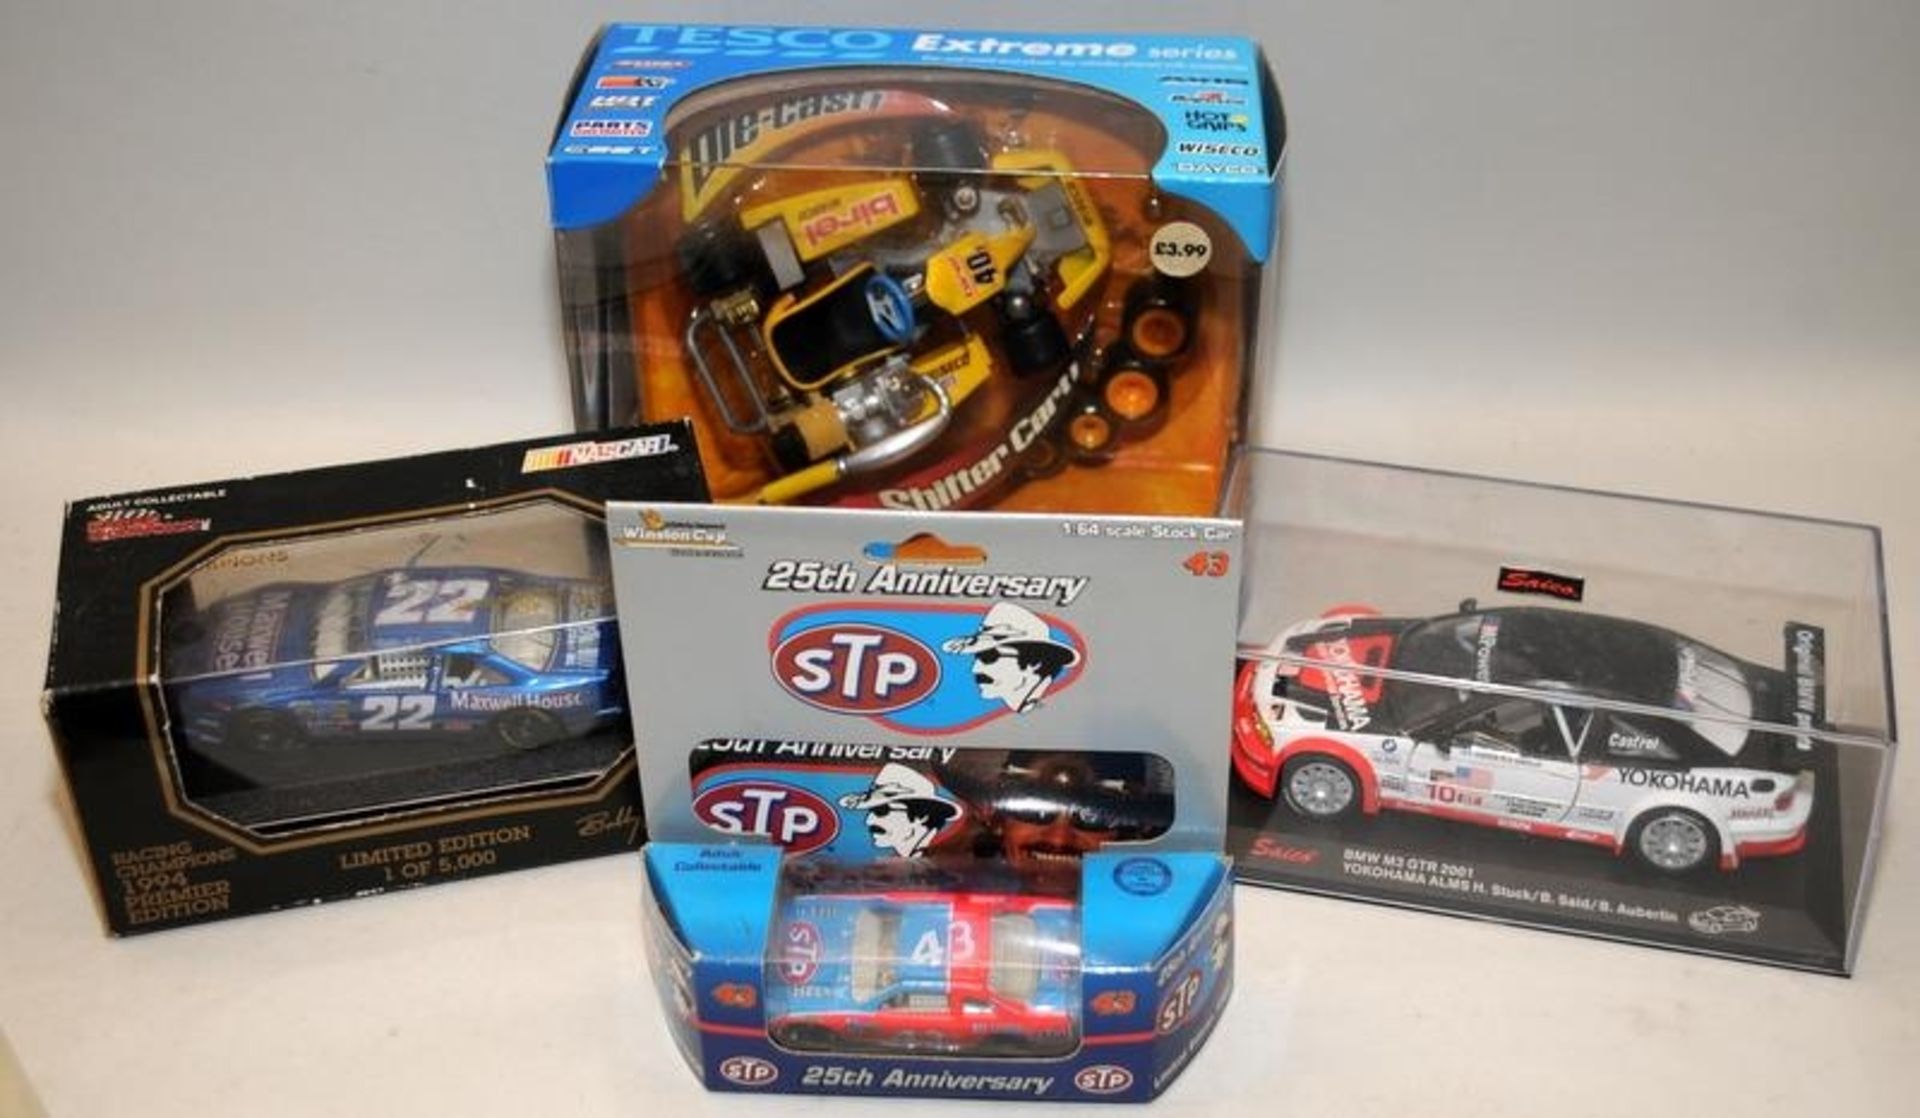 Collection of Nascar etc die-cast model racing cars c/w American Choppers series bike c/w trading - Image 3 of 4